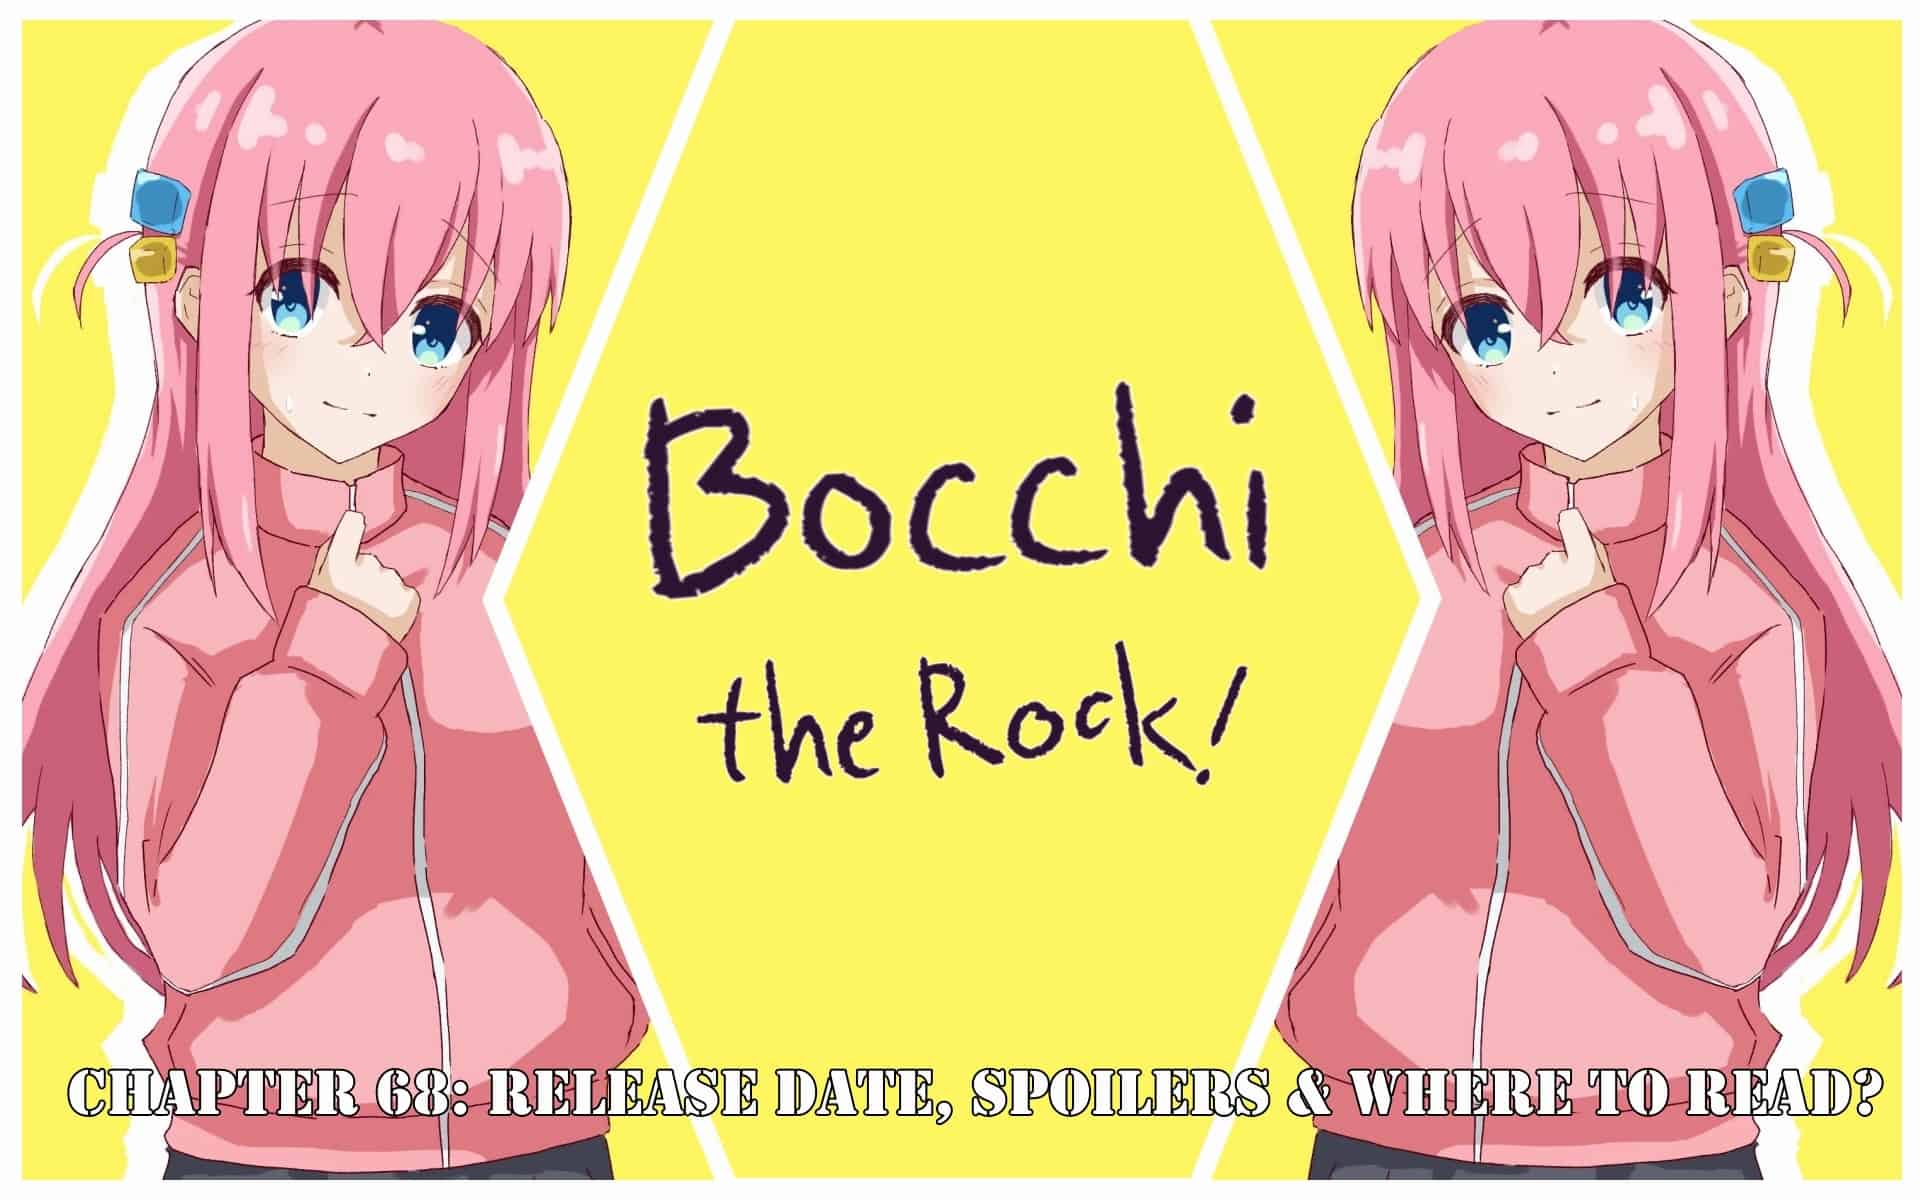 Bocchi the Rock! Chapter 68: Release Date, Spoilers & Where to Read?